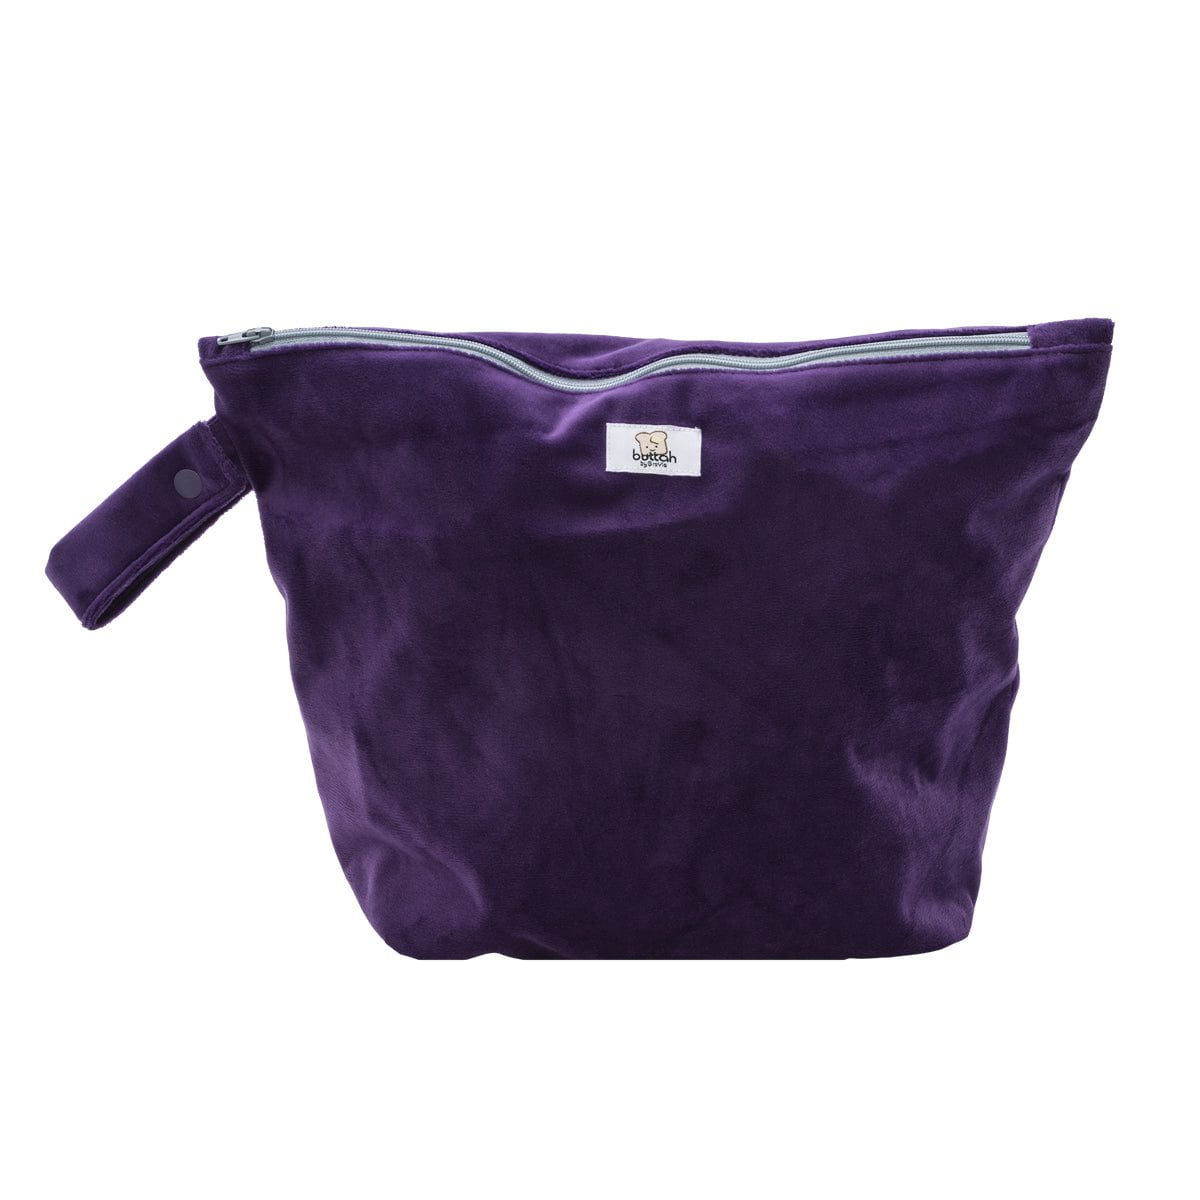 2022 Special Edition Zippered Wetbag- Celie